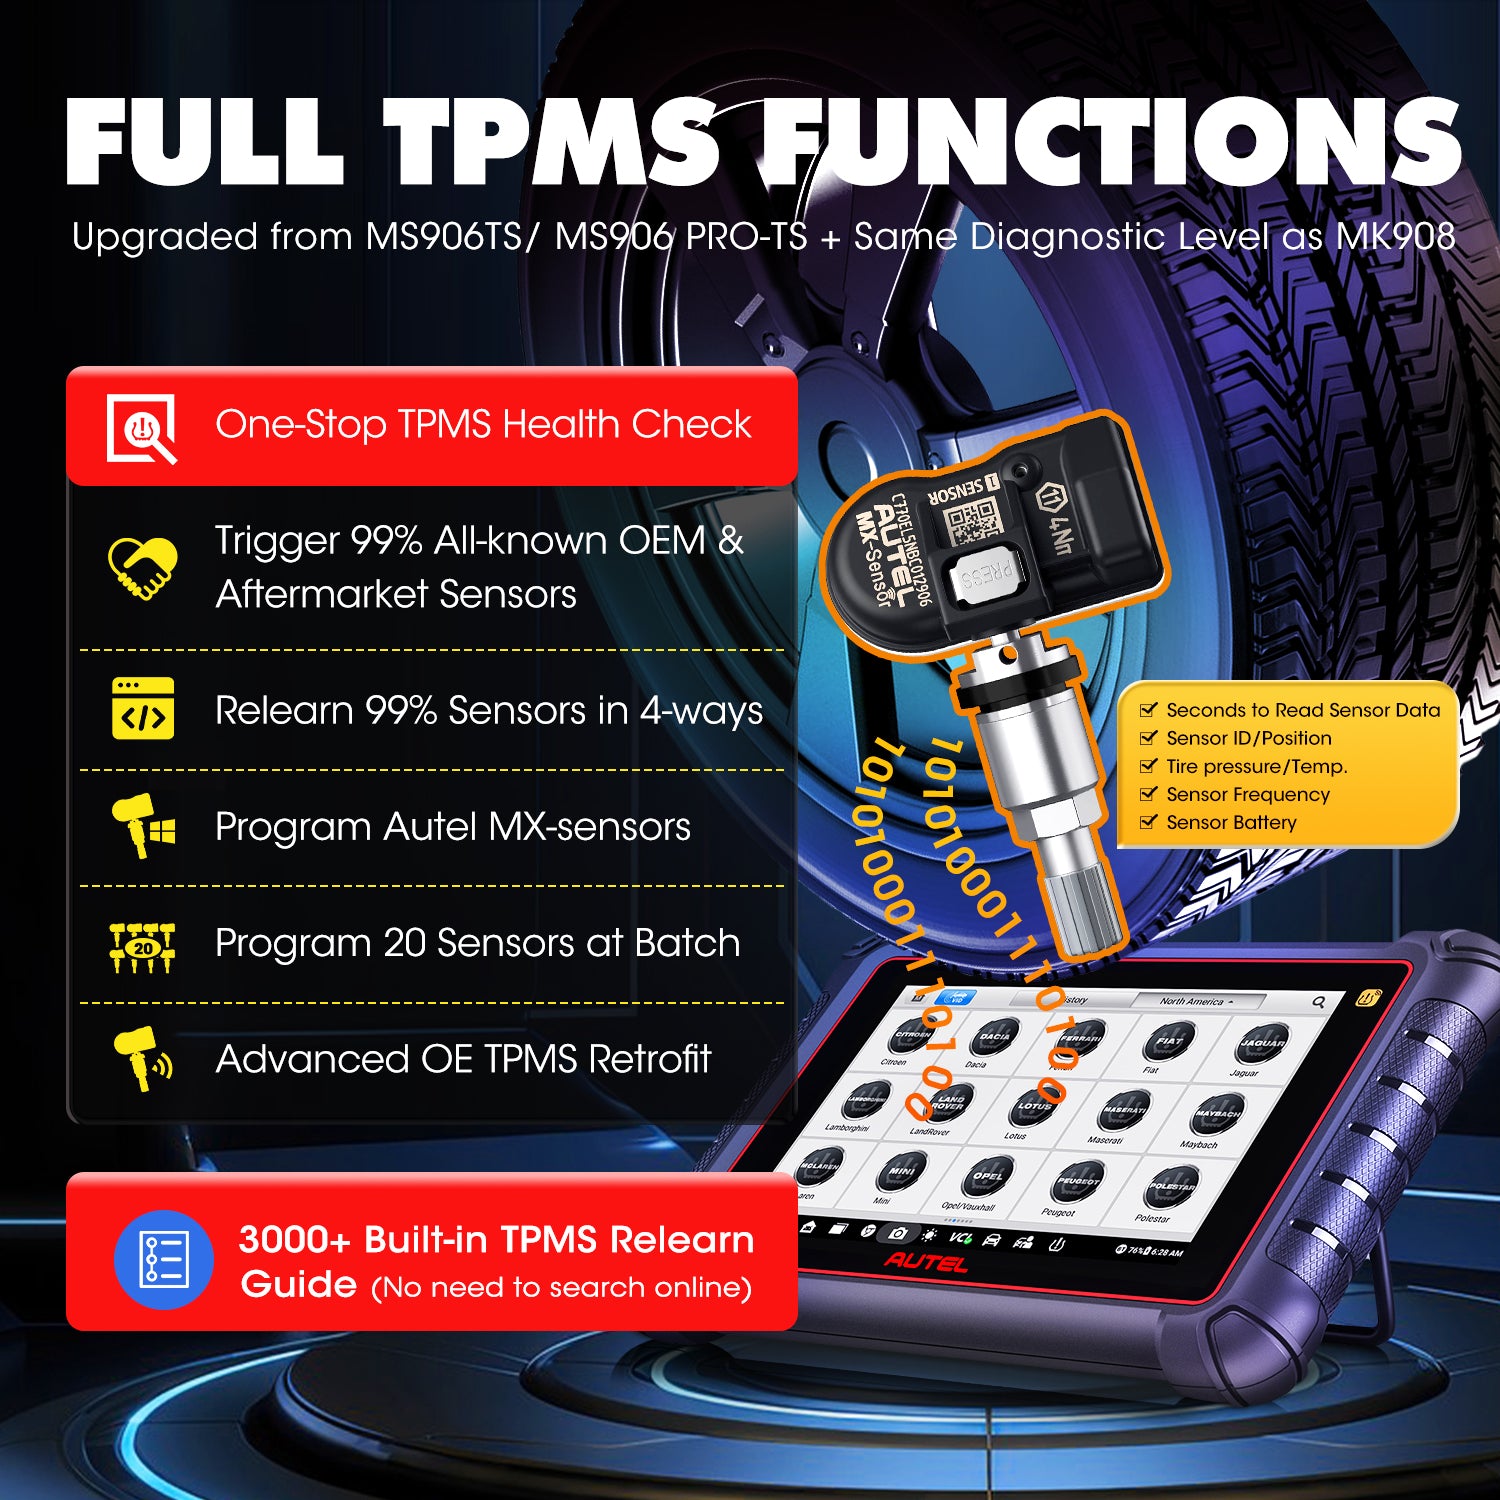 Autel MP900TS Complete TPMS Functions